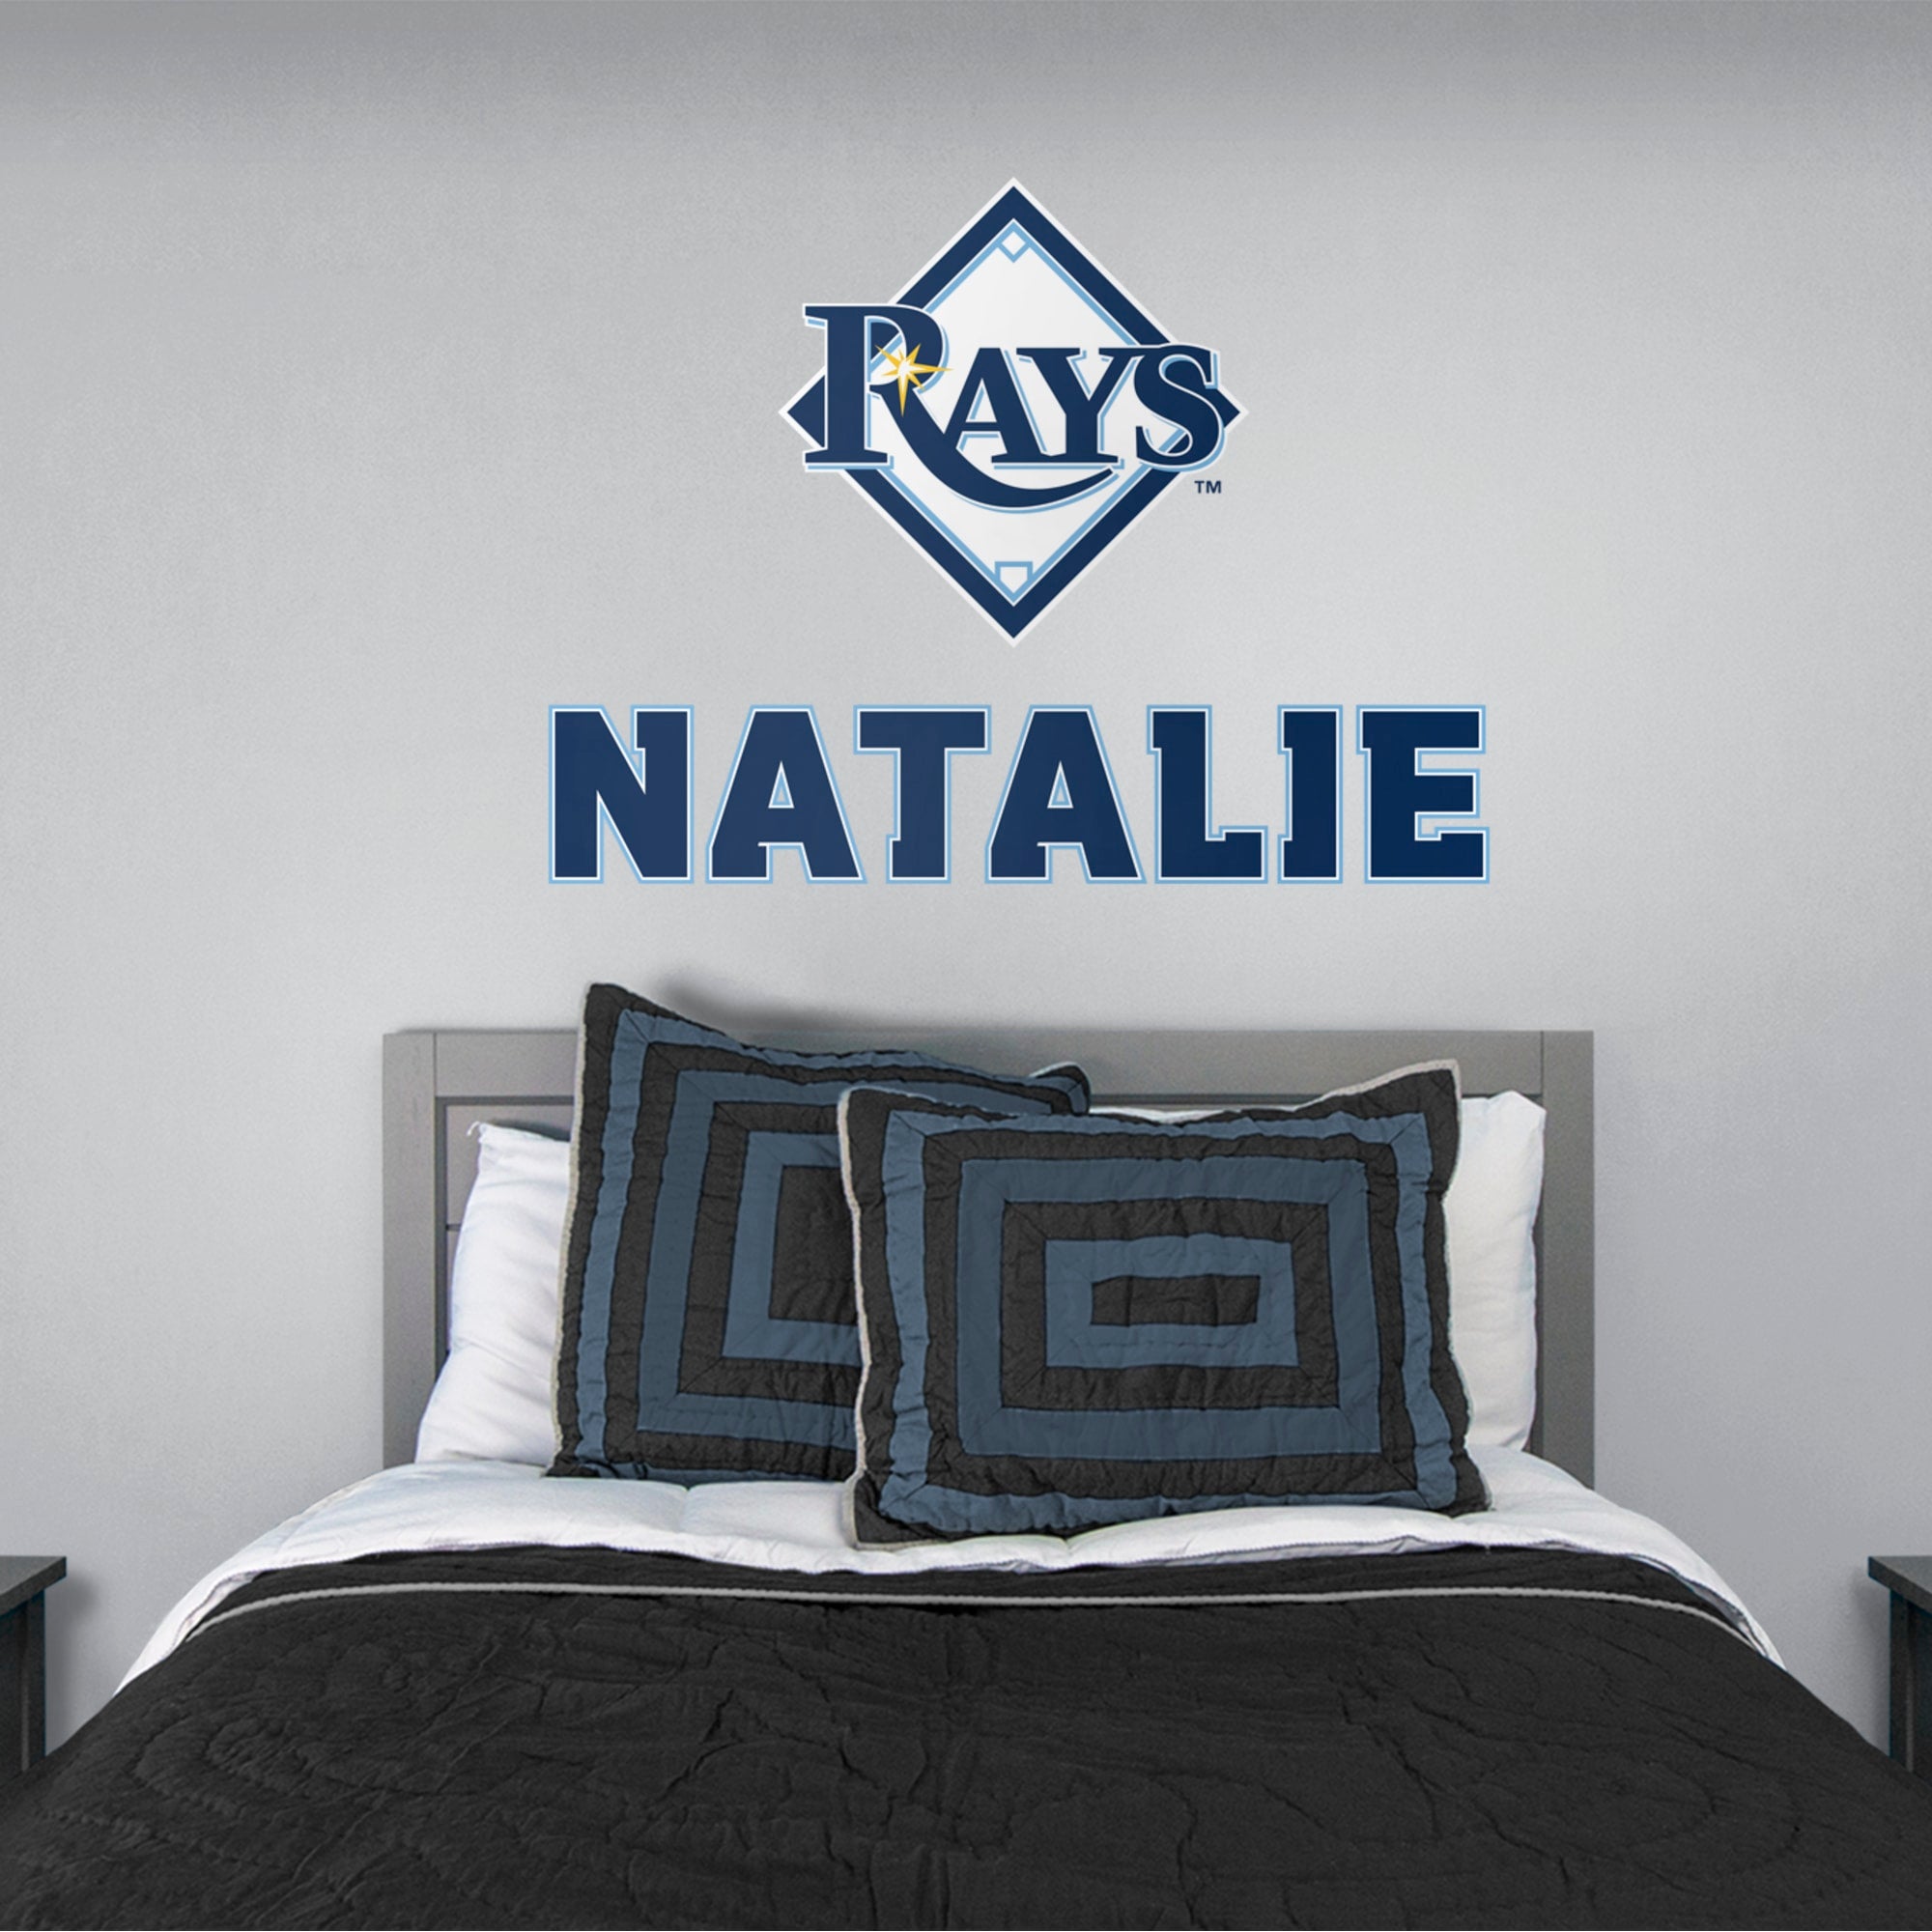 Tampa Bay Rays: Stacked Personalized Name - Officially Licensed MLB Transfer Decal in Navy (52"W x 39.5"H) by Fathead | Vinyl